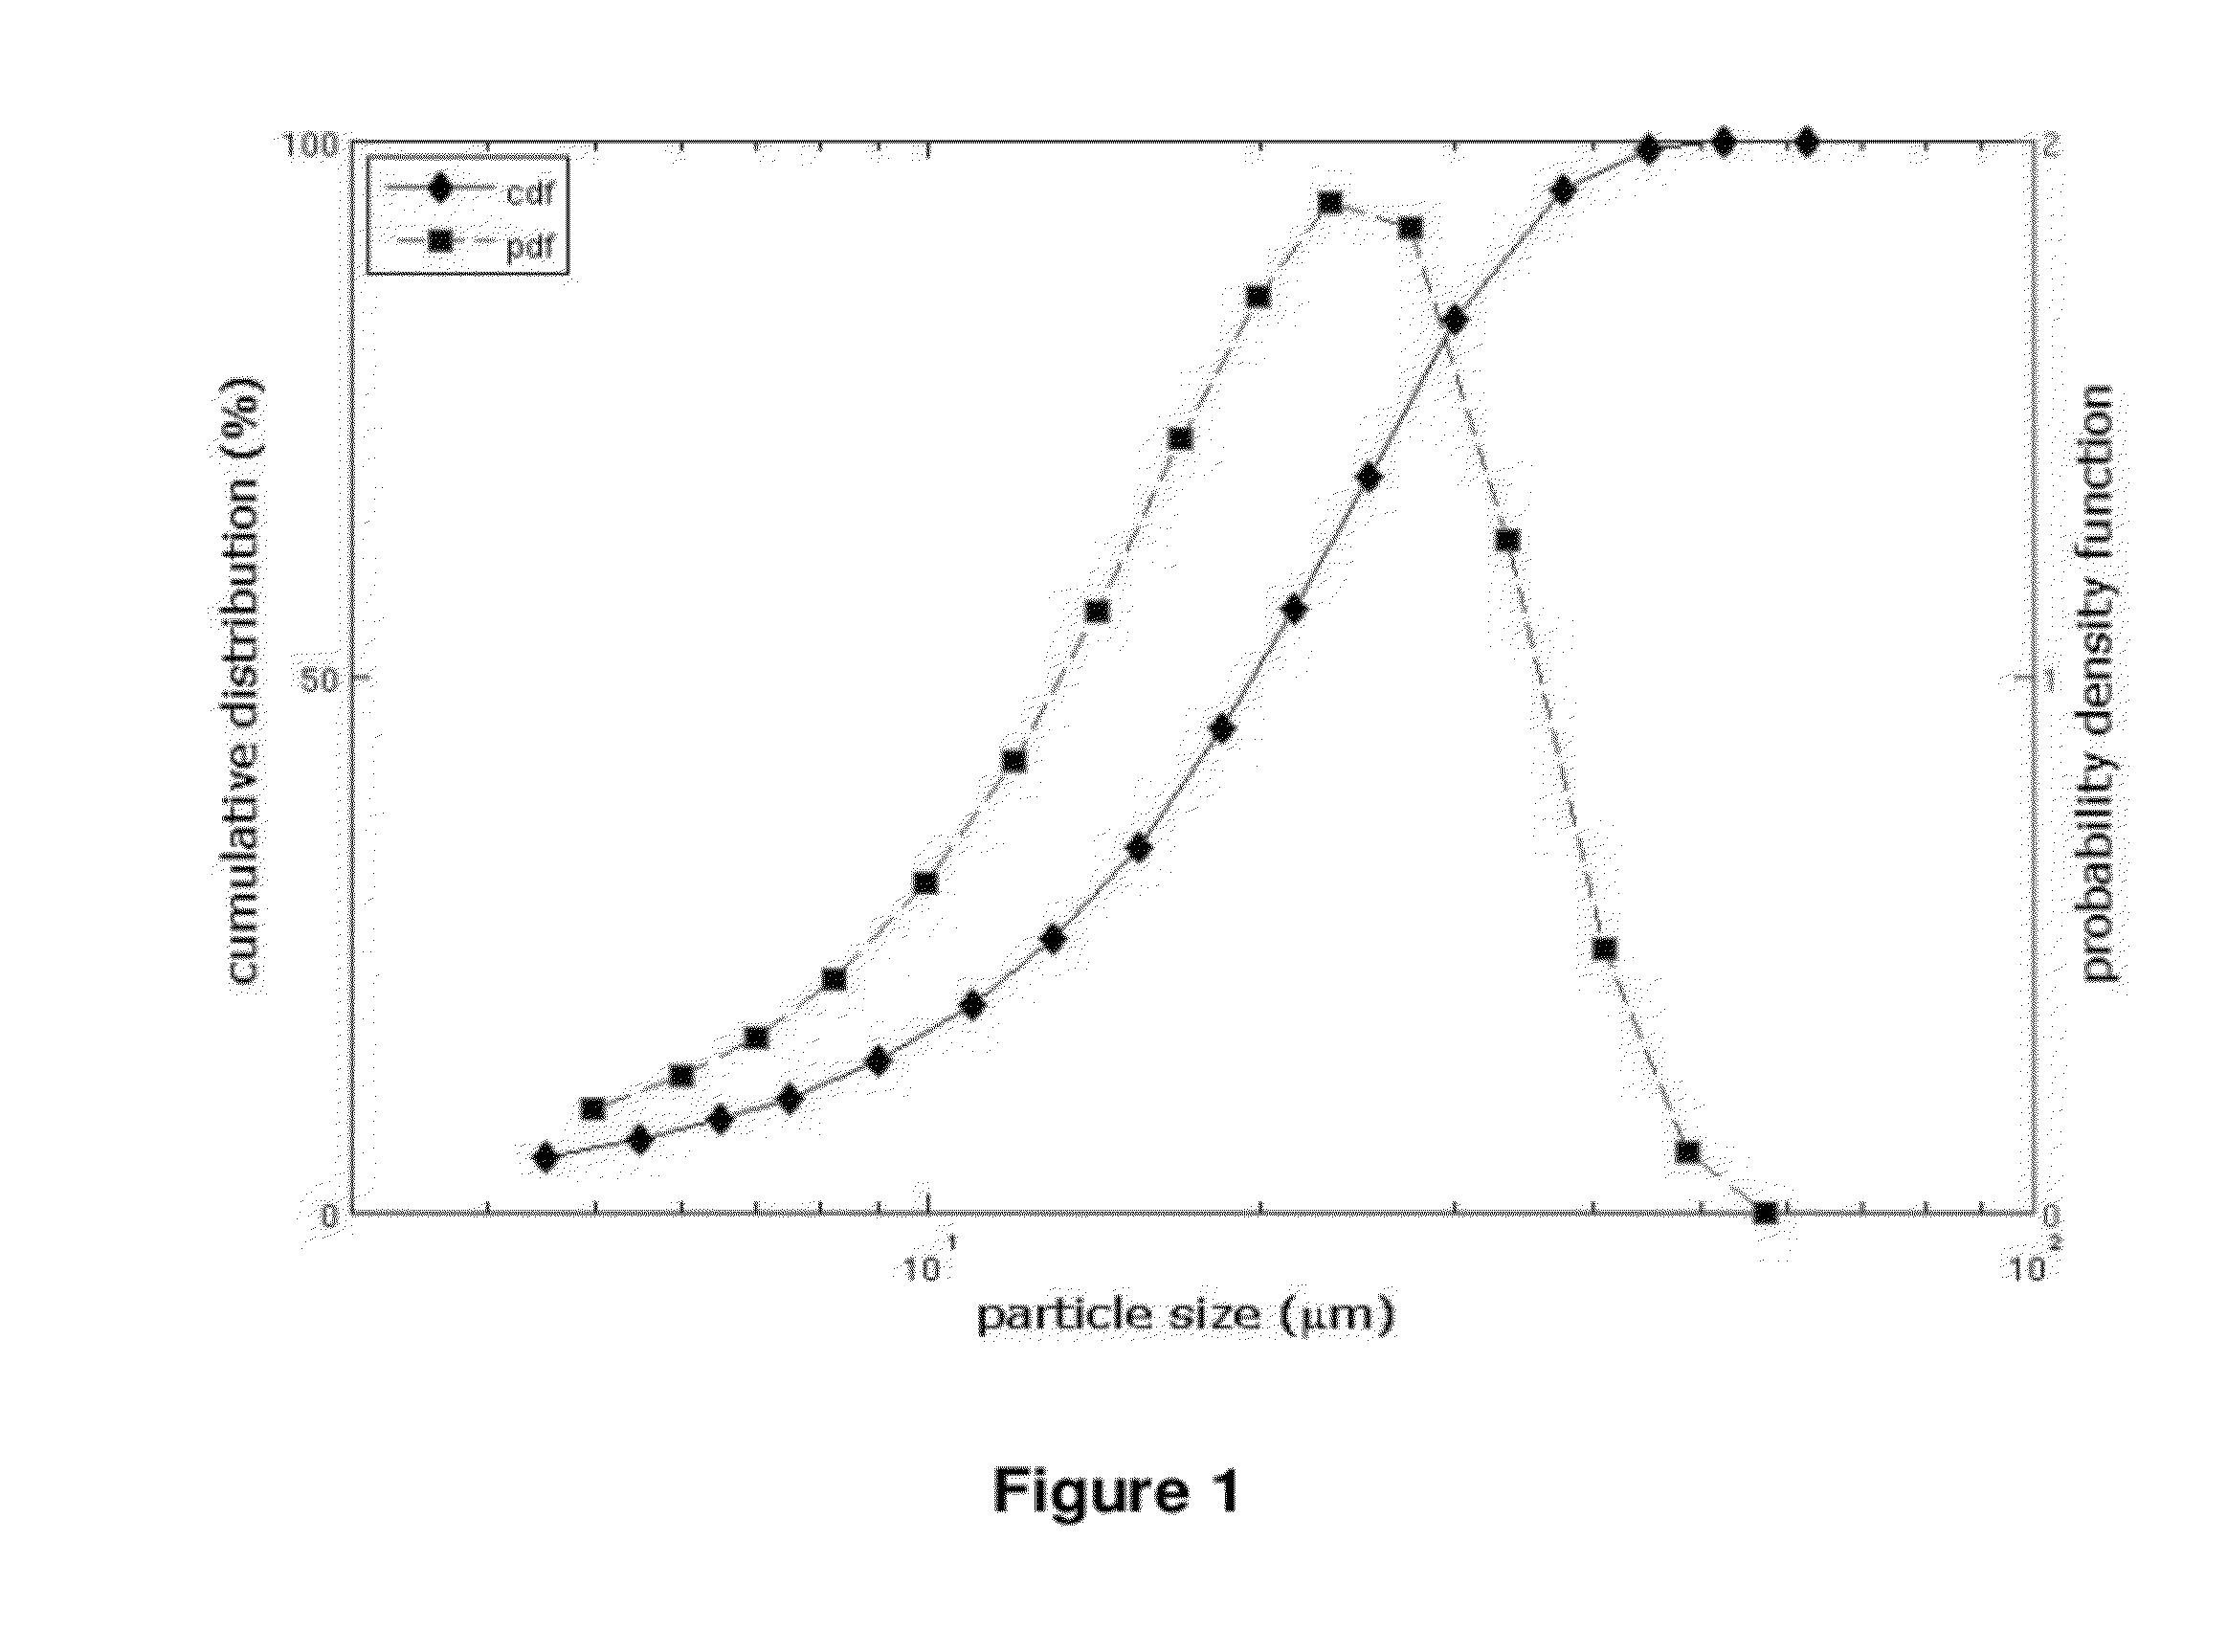 Pharmaceutical compositions comprising active drugs, contraceptive kits comprising active drugs, and methods of administering the same